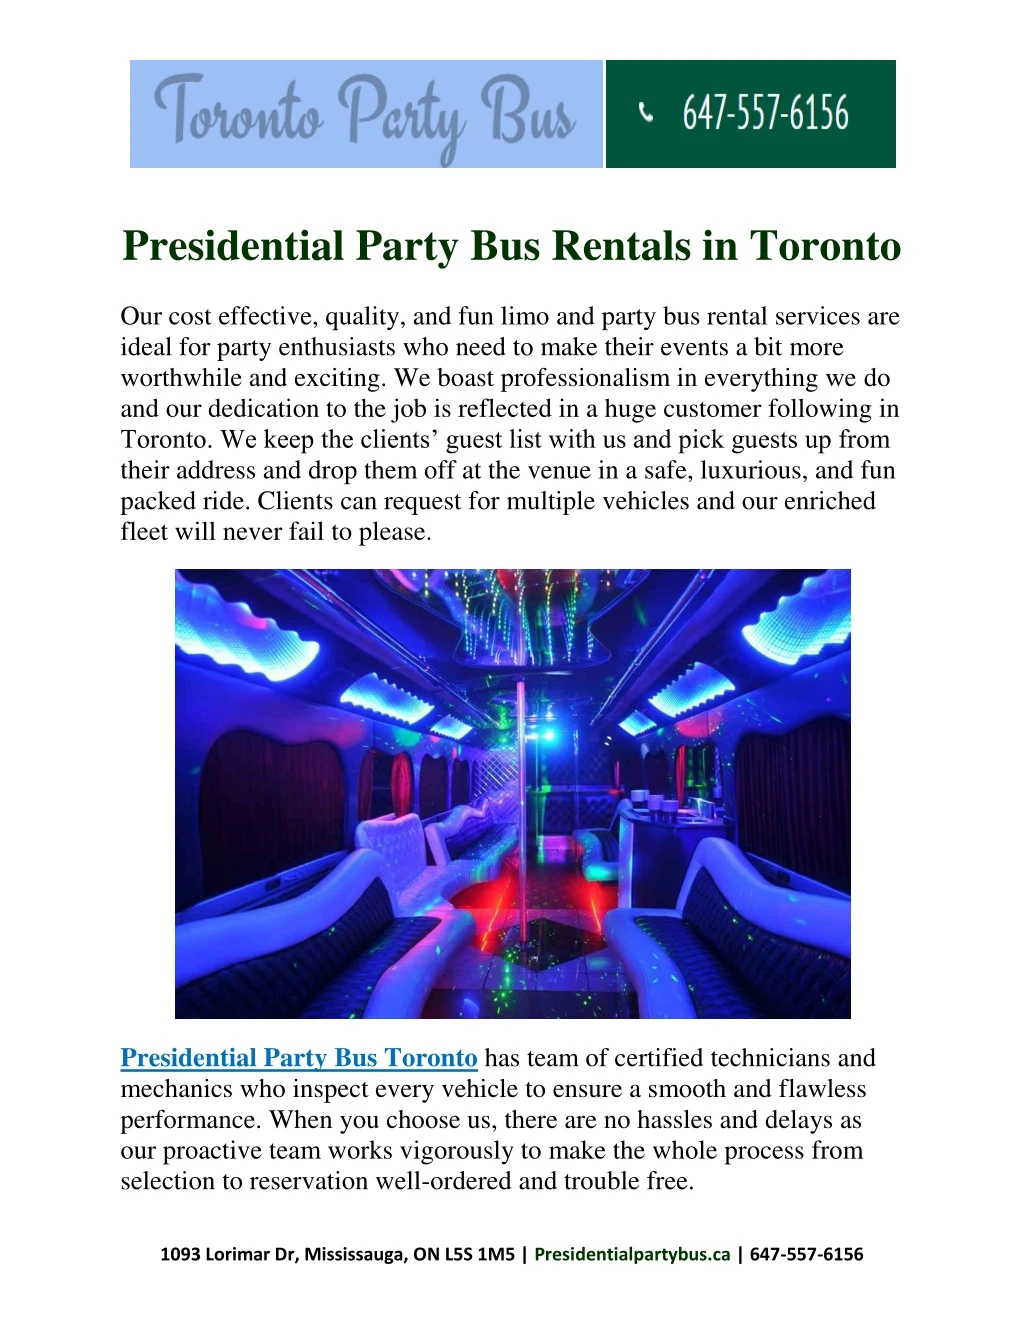 presidential party bus rentals in toronto